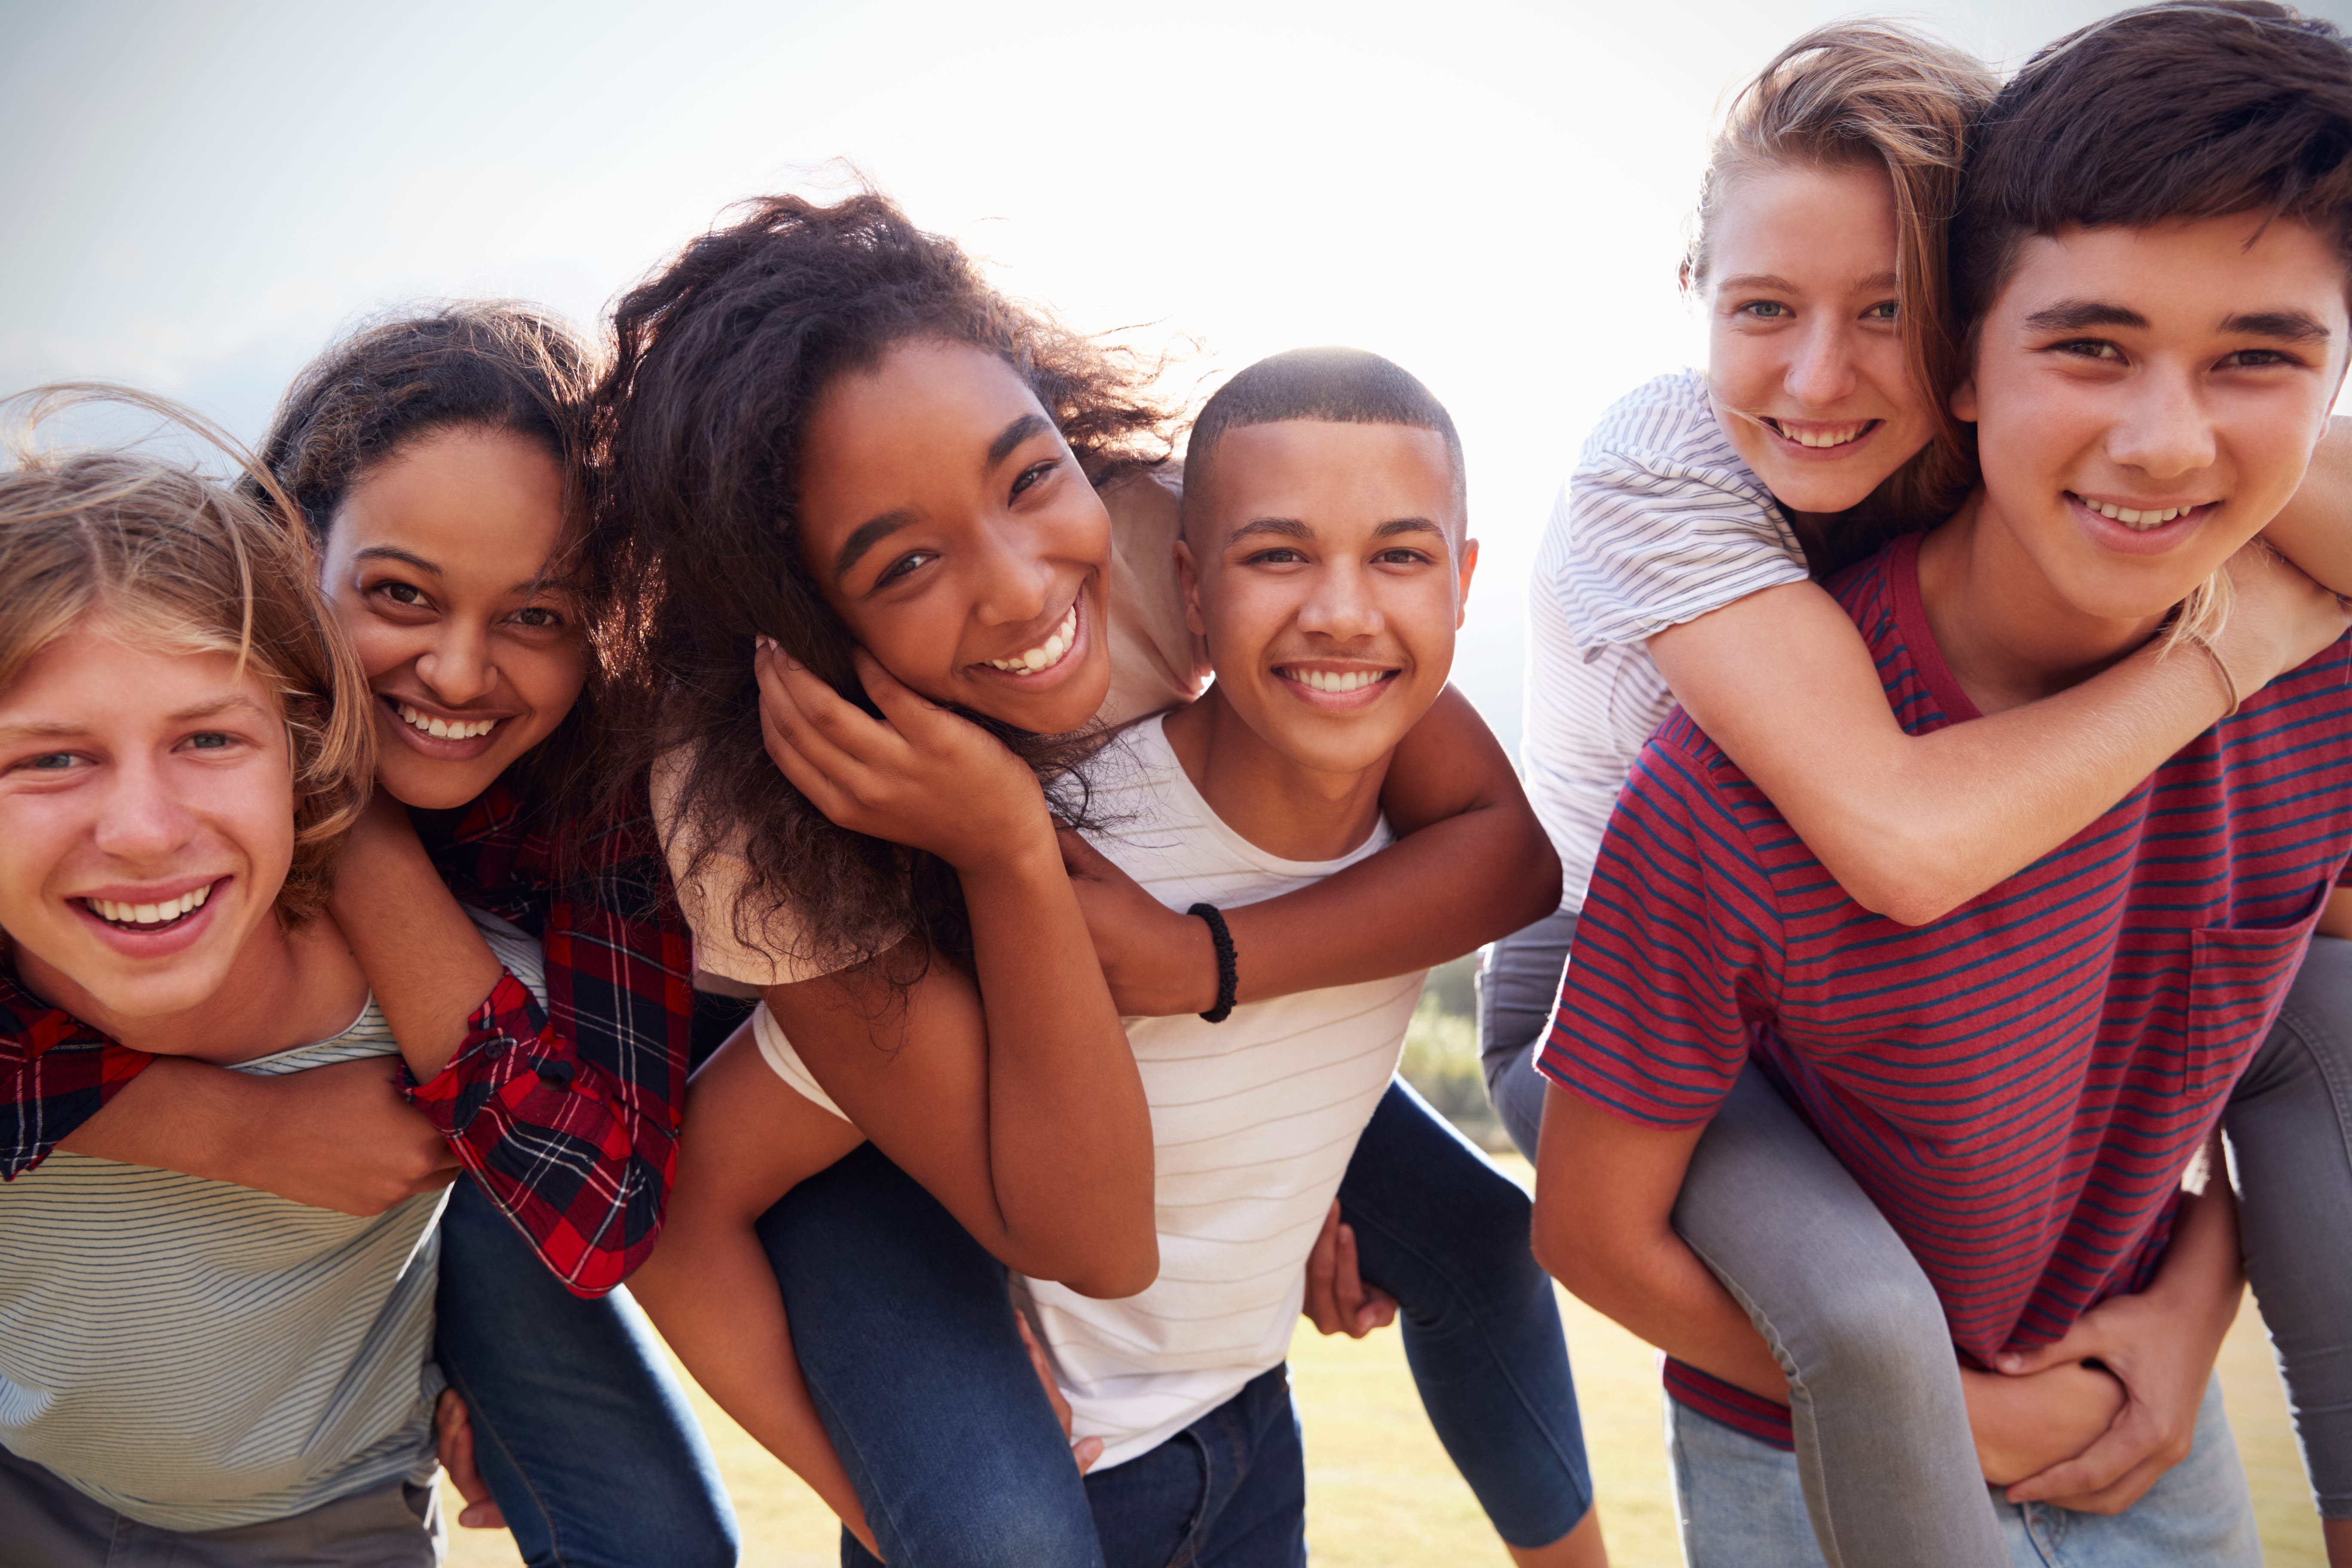 Outdoor shot of a group of teenagers smiling with some piggy backing on the backs of others.